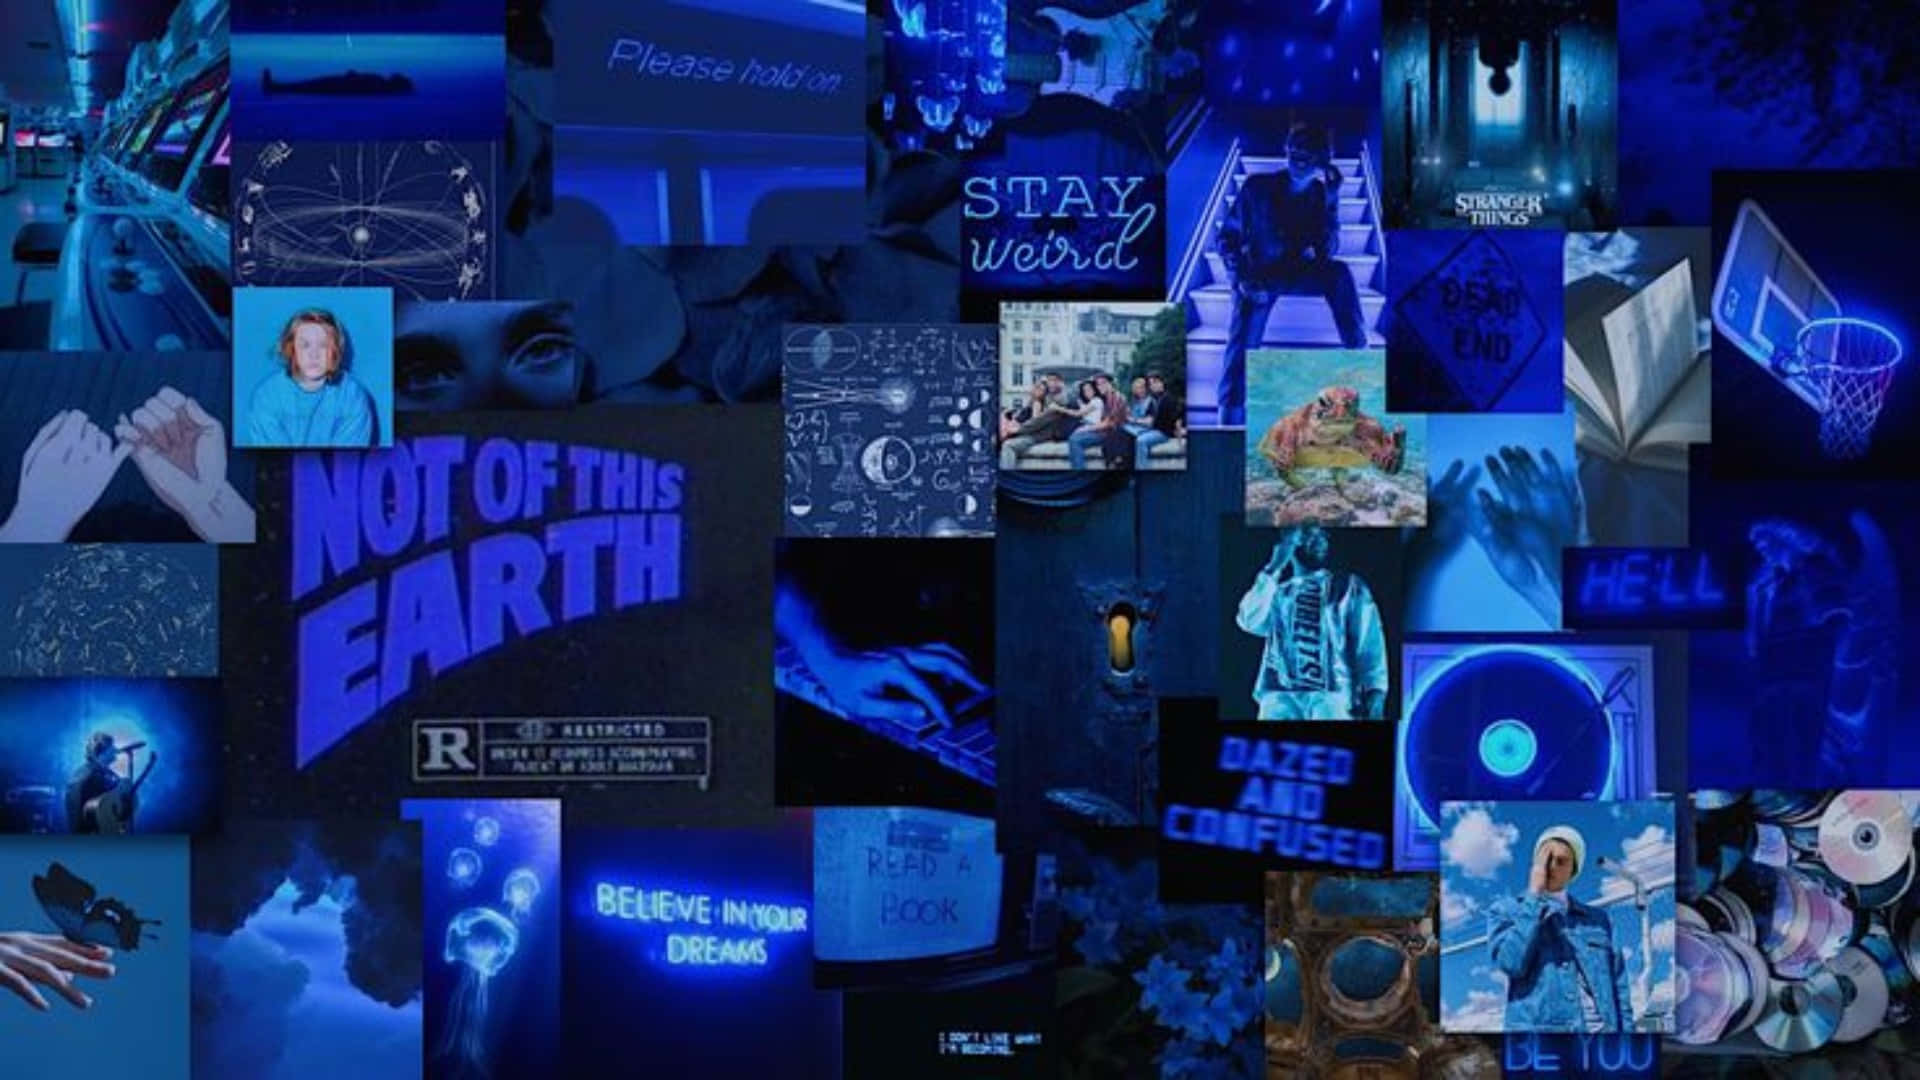 A Collage Of Blue Images With The Words Not Of The Earth